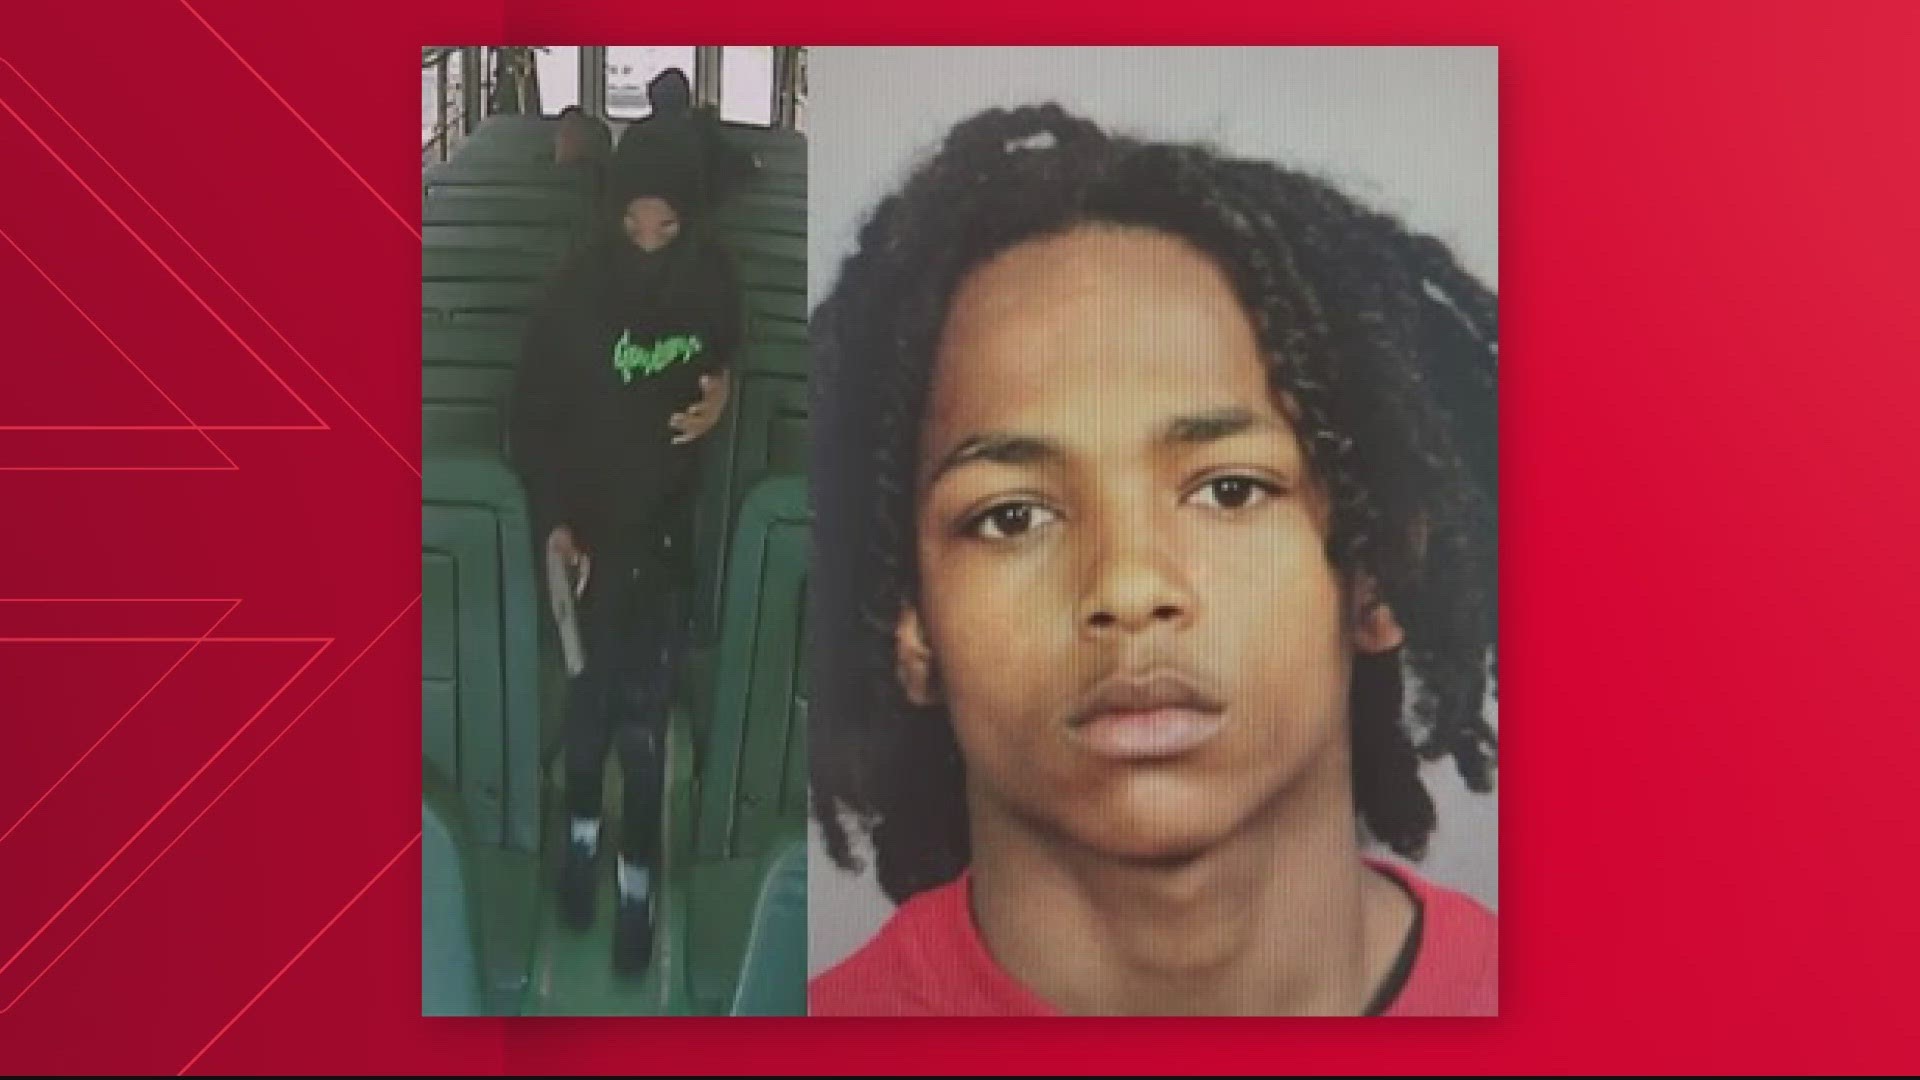 After searching for weeks, a 15-year-old boy accused of trying to kill a middle schooler on a Prince George's County school bus is in custody.